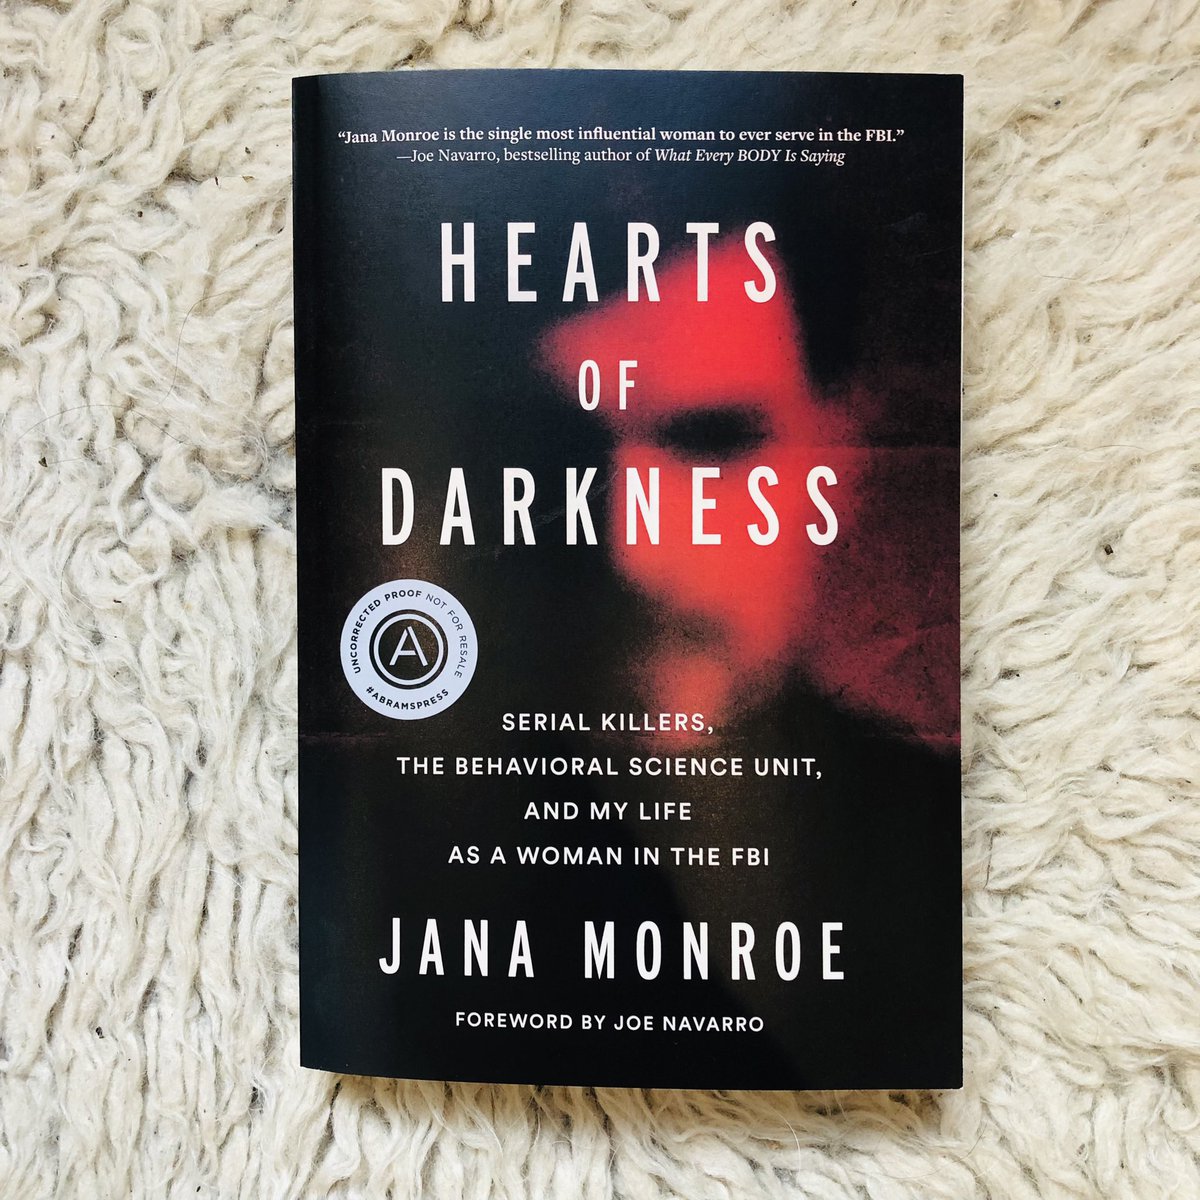 If you know me, you know I am RIDICULOUSLY excited to have a proof of HEARTS OF DARKNESS by Jana Monroe, a memoir of the first woman in the FBI’s BSU. This is a proof from my US publishers @AbramsChronicle but it’s out in the U.K. in October from @orionbooks @SevenDialsBooks